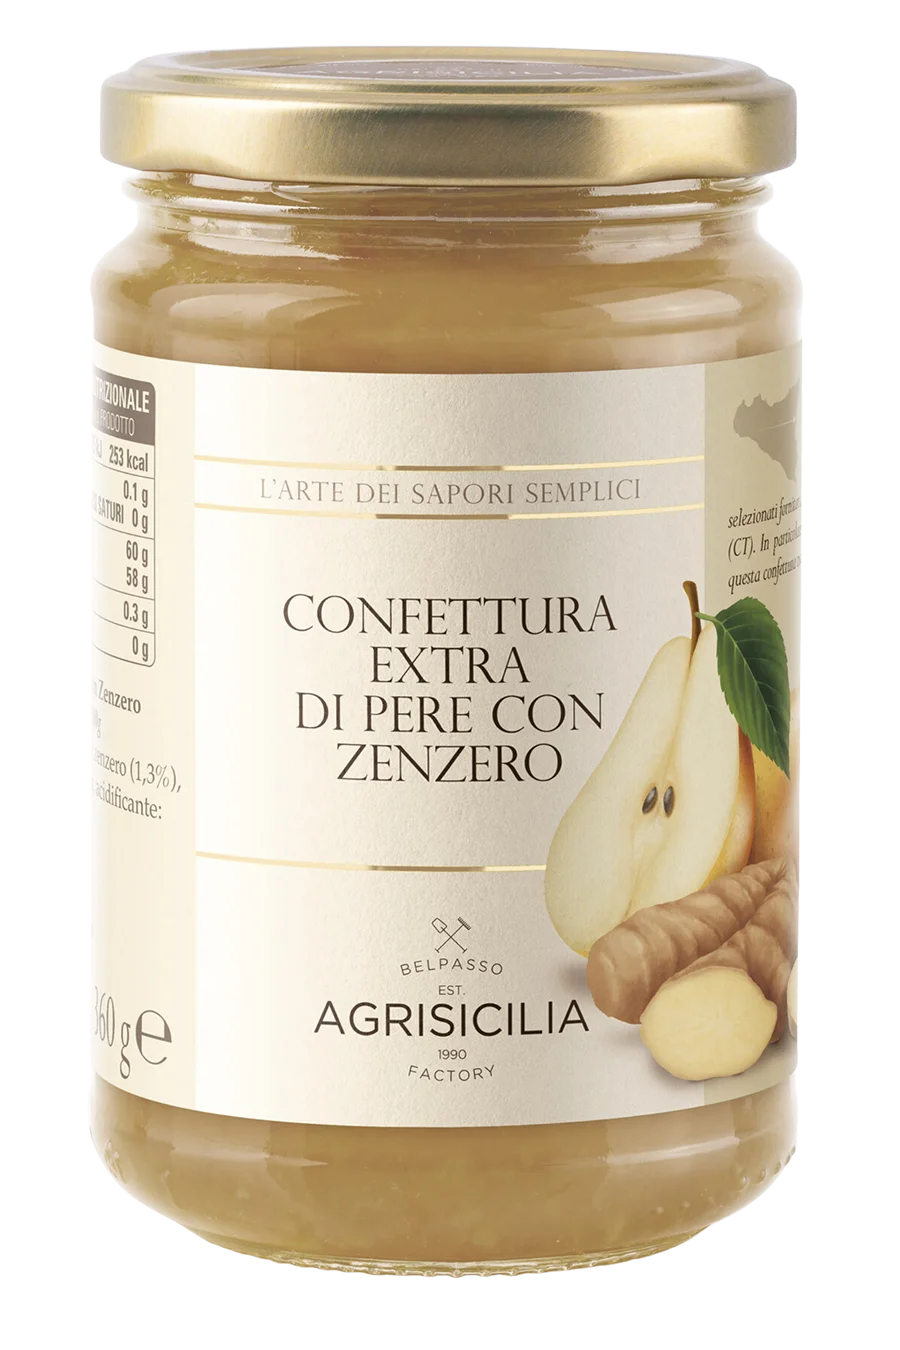 jar of AGRISICILIA extra jam with pears and ginger